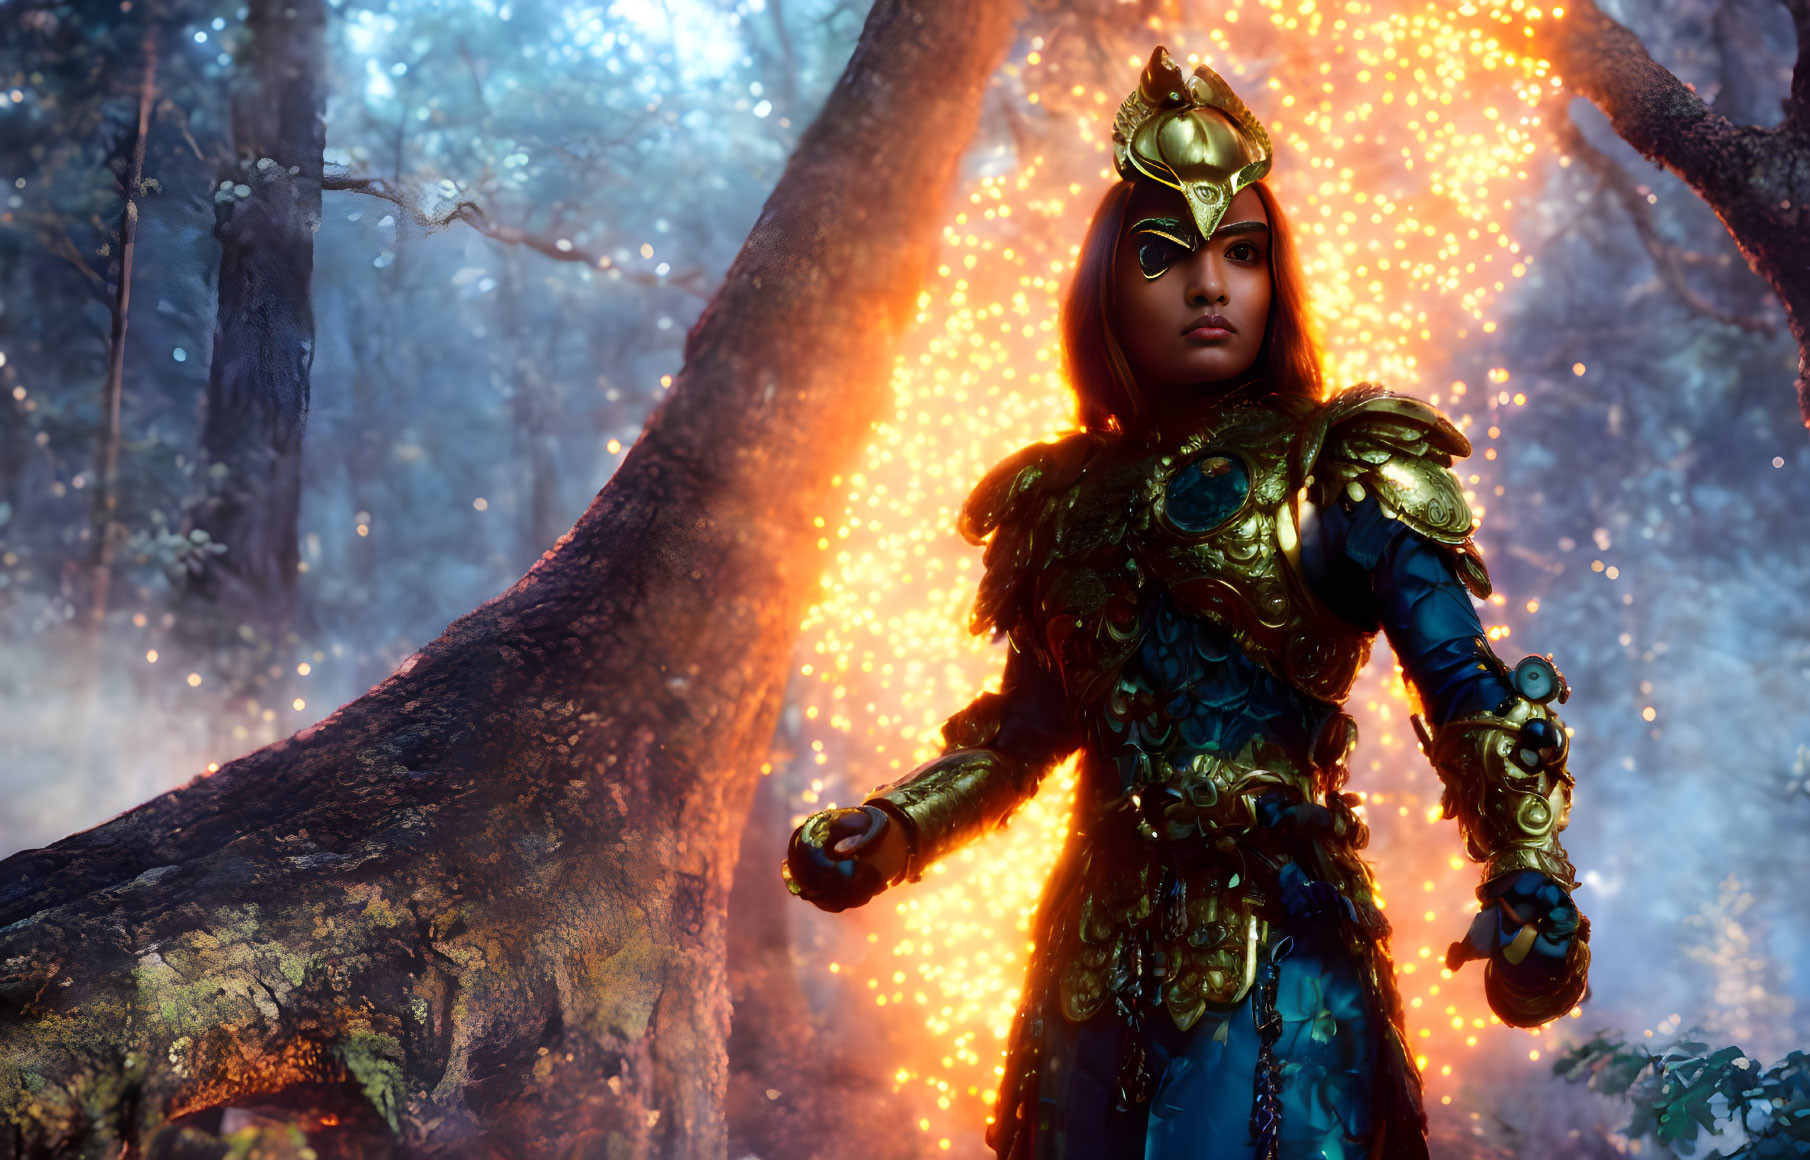 Person in Golden and Blue Armor in Mystical Forest with Glowing Particles and Luminous Tree